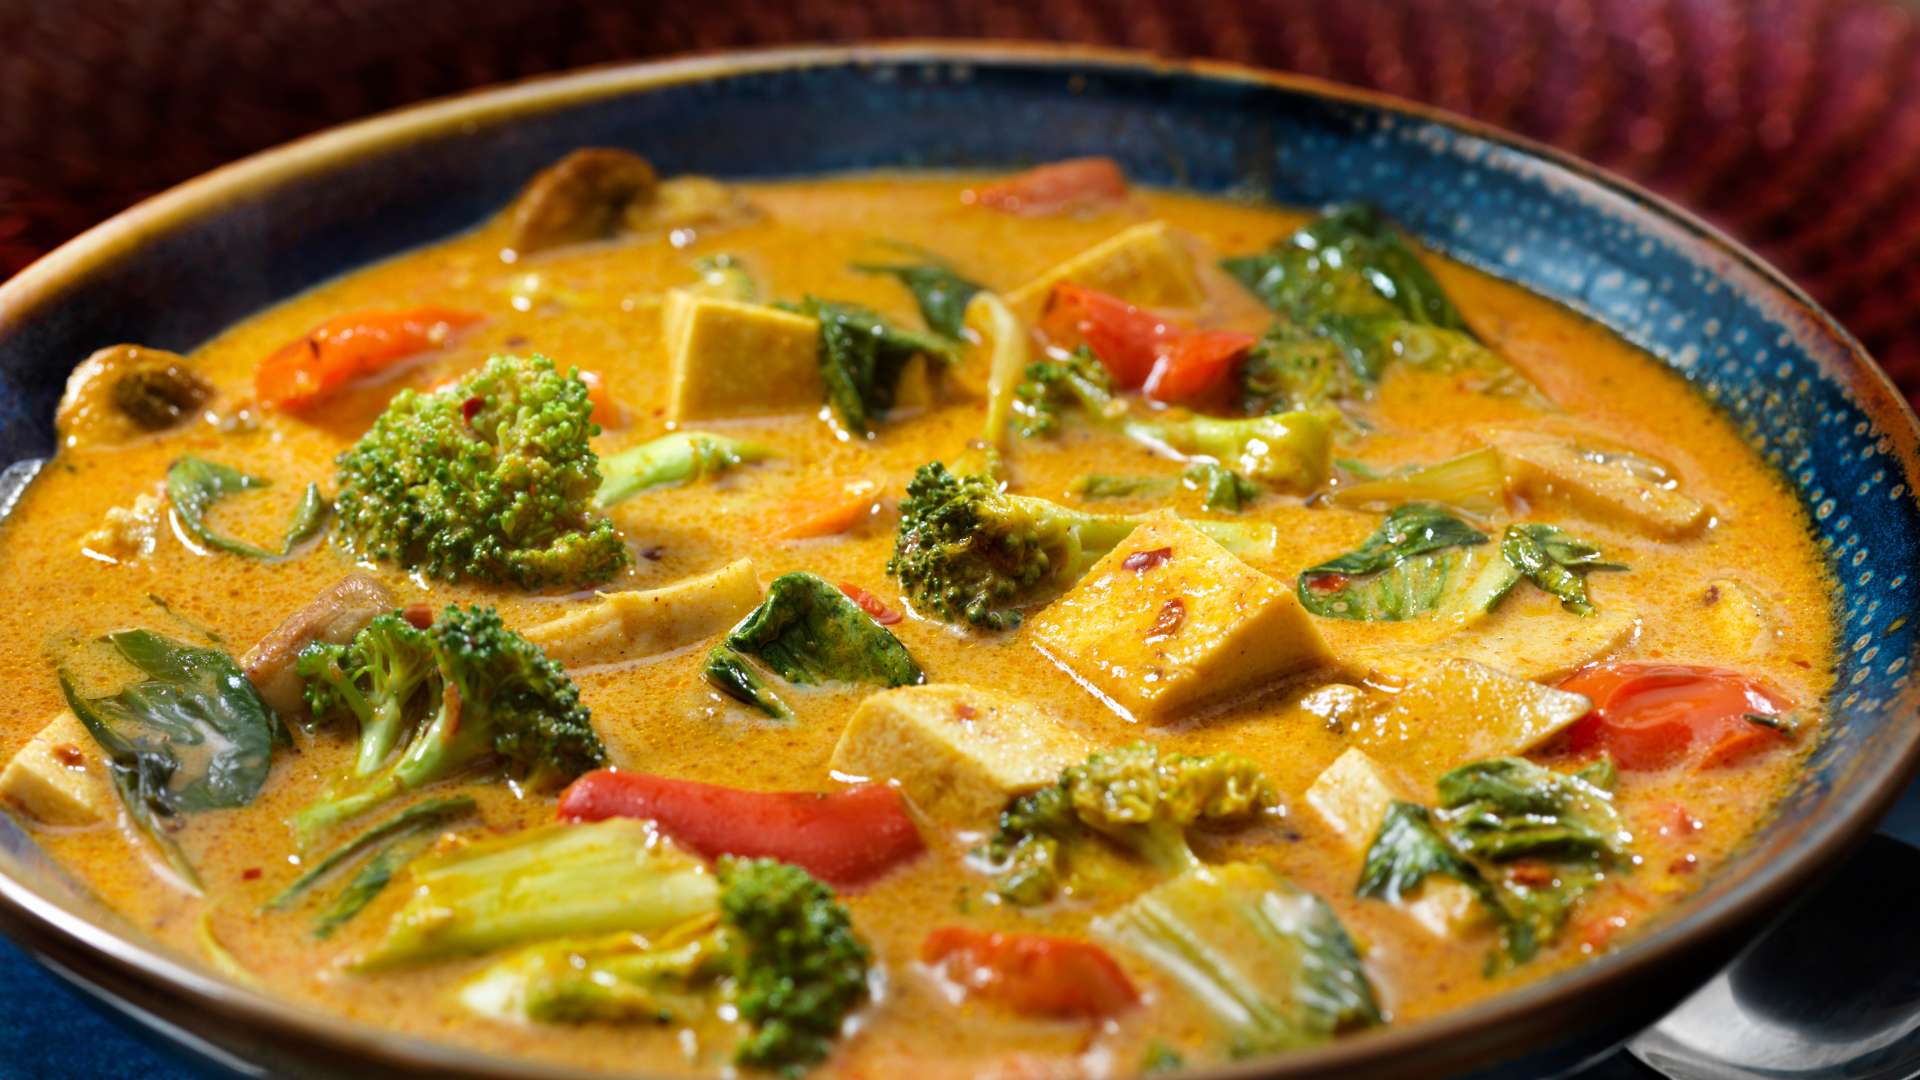 Vegetable curry | Diabetes meal recipe